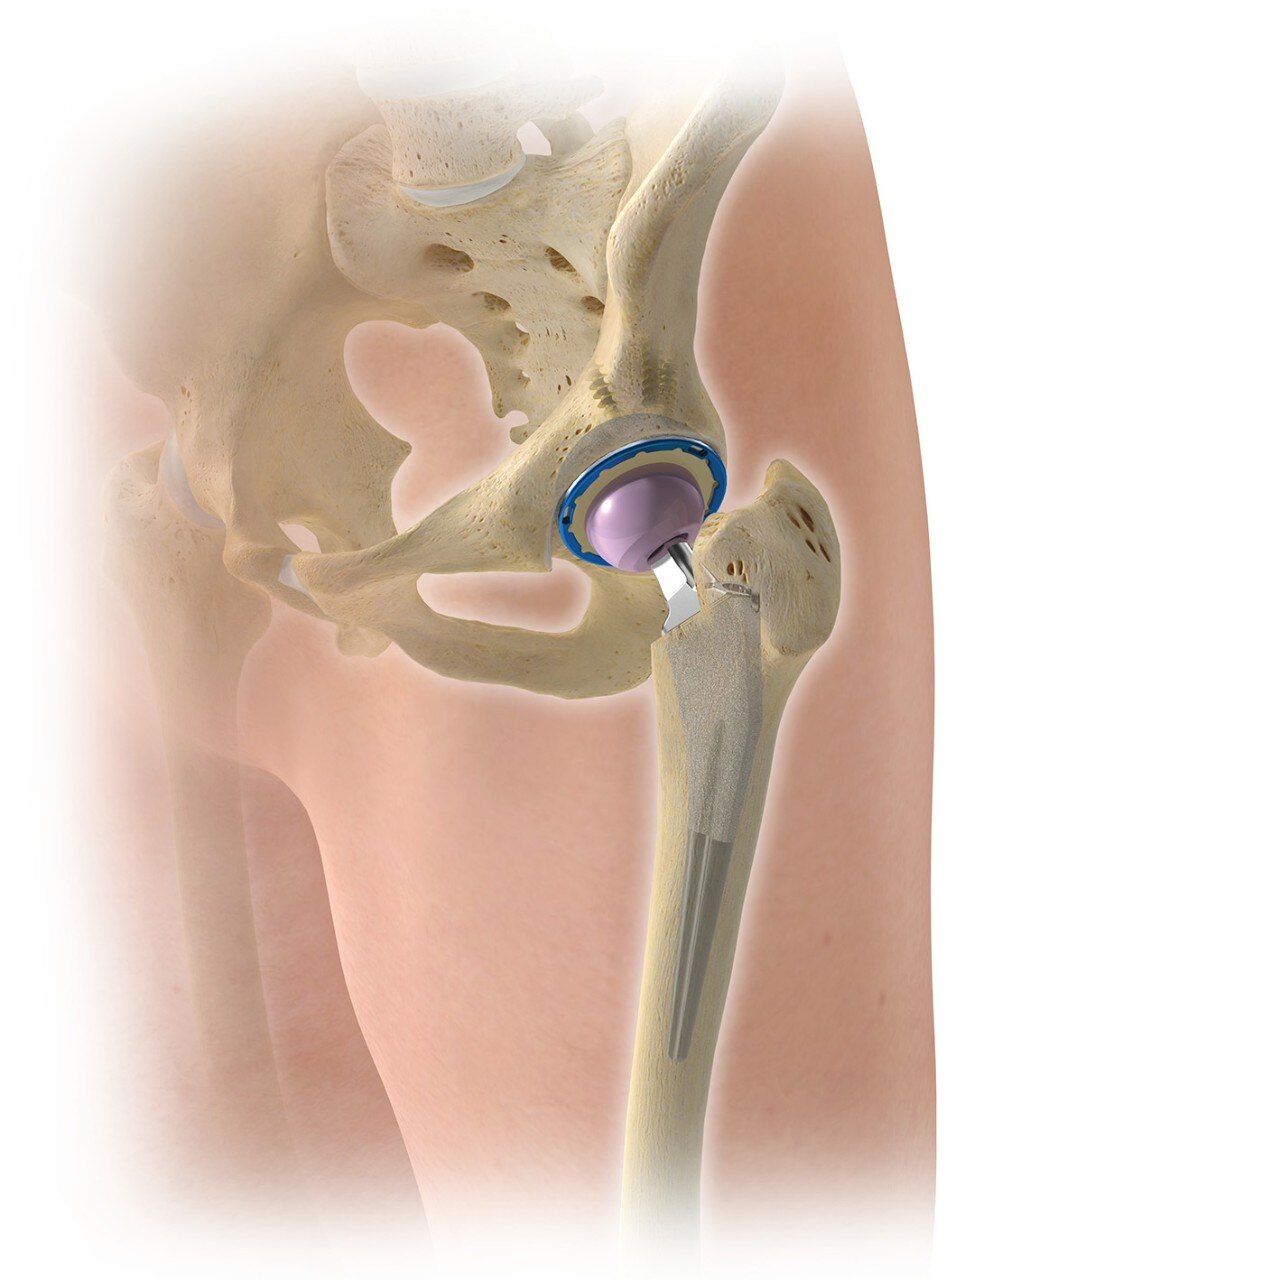 Hip-pain-relief-surgical-treatment-options-inline-image-total-hip-replace.